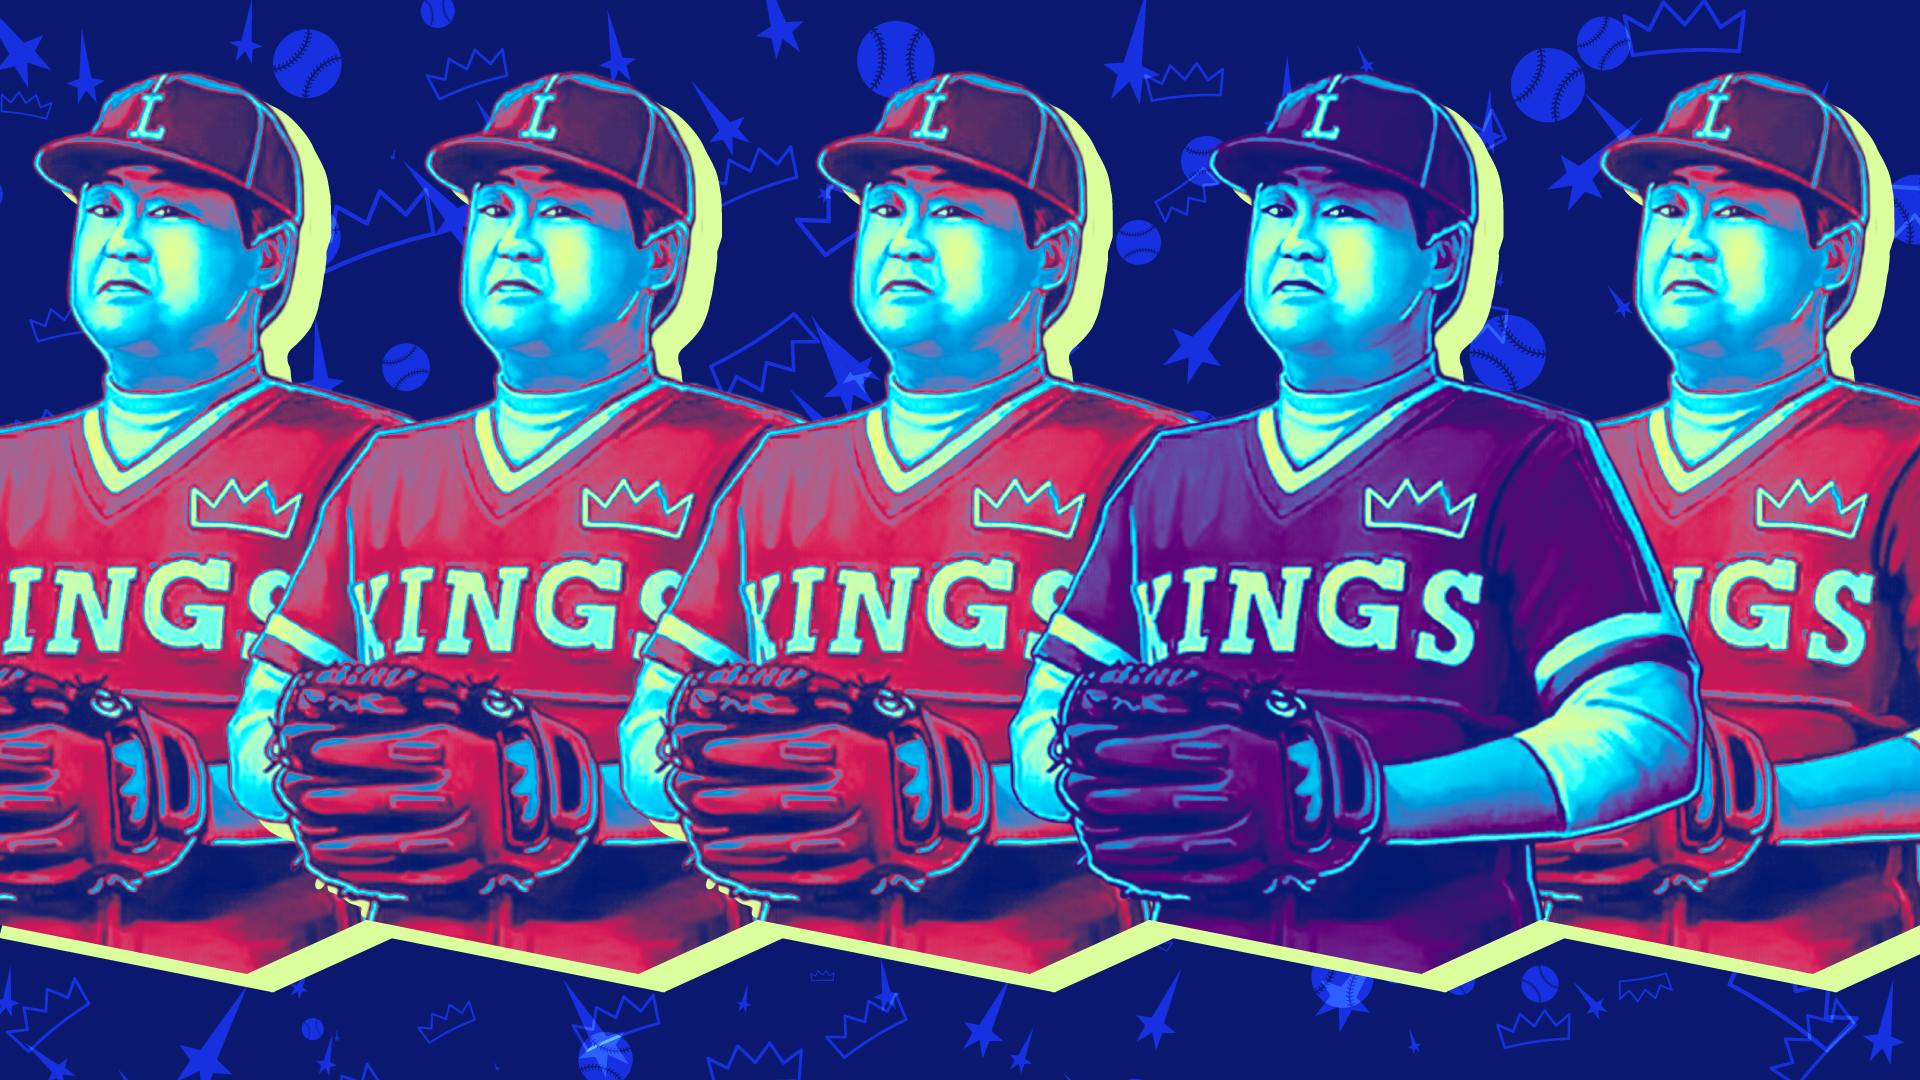 Illustrated banner featuring a repetition of stylized depictions of Star Trek: Deep Space Nine's holo-baseball character Buck Bokai